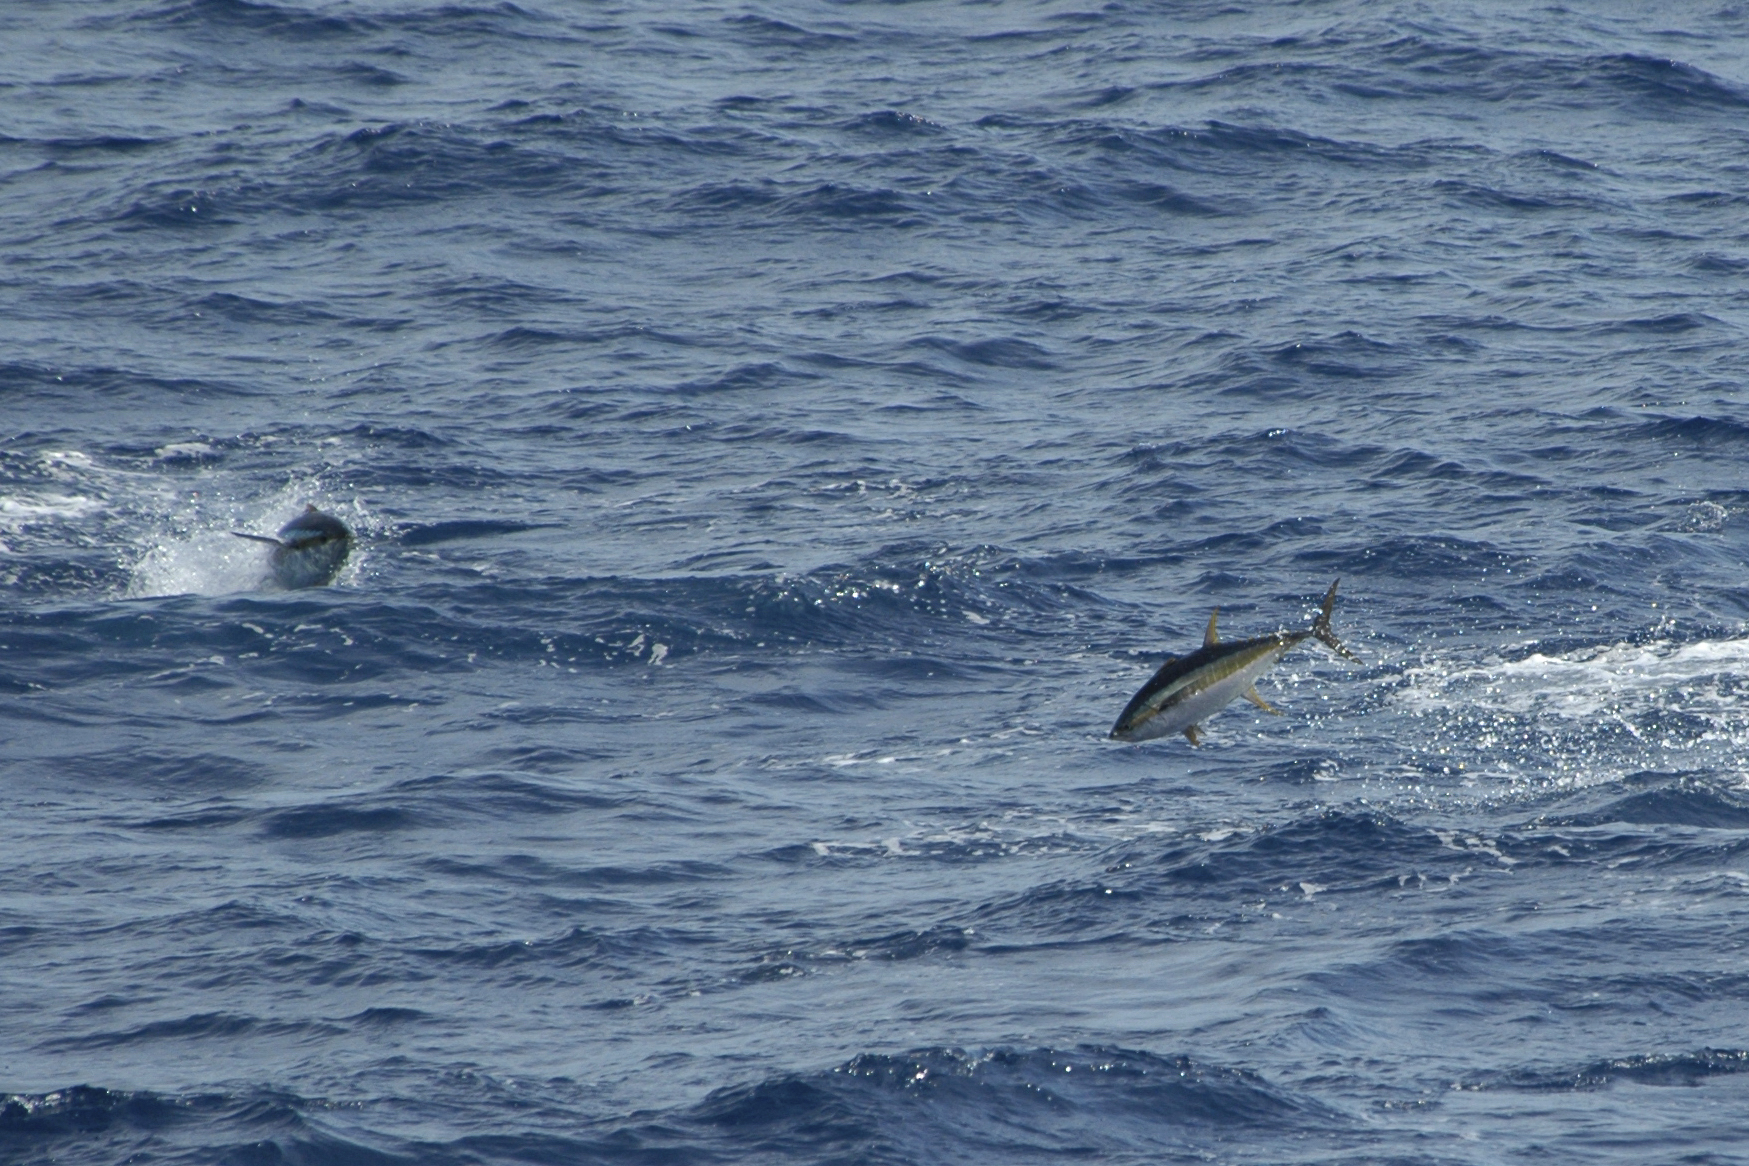 Two Yellowfin Tuna jump out of water